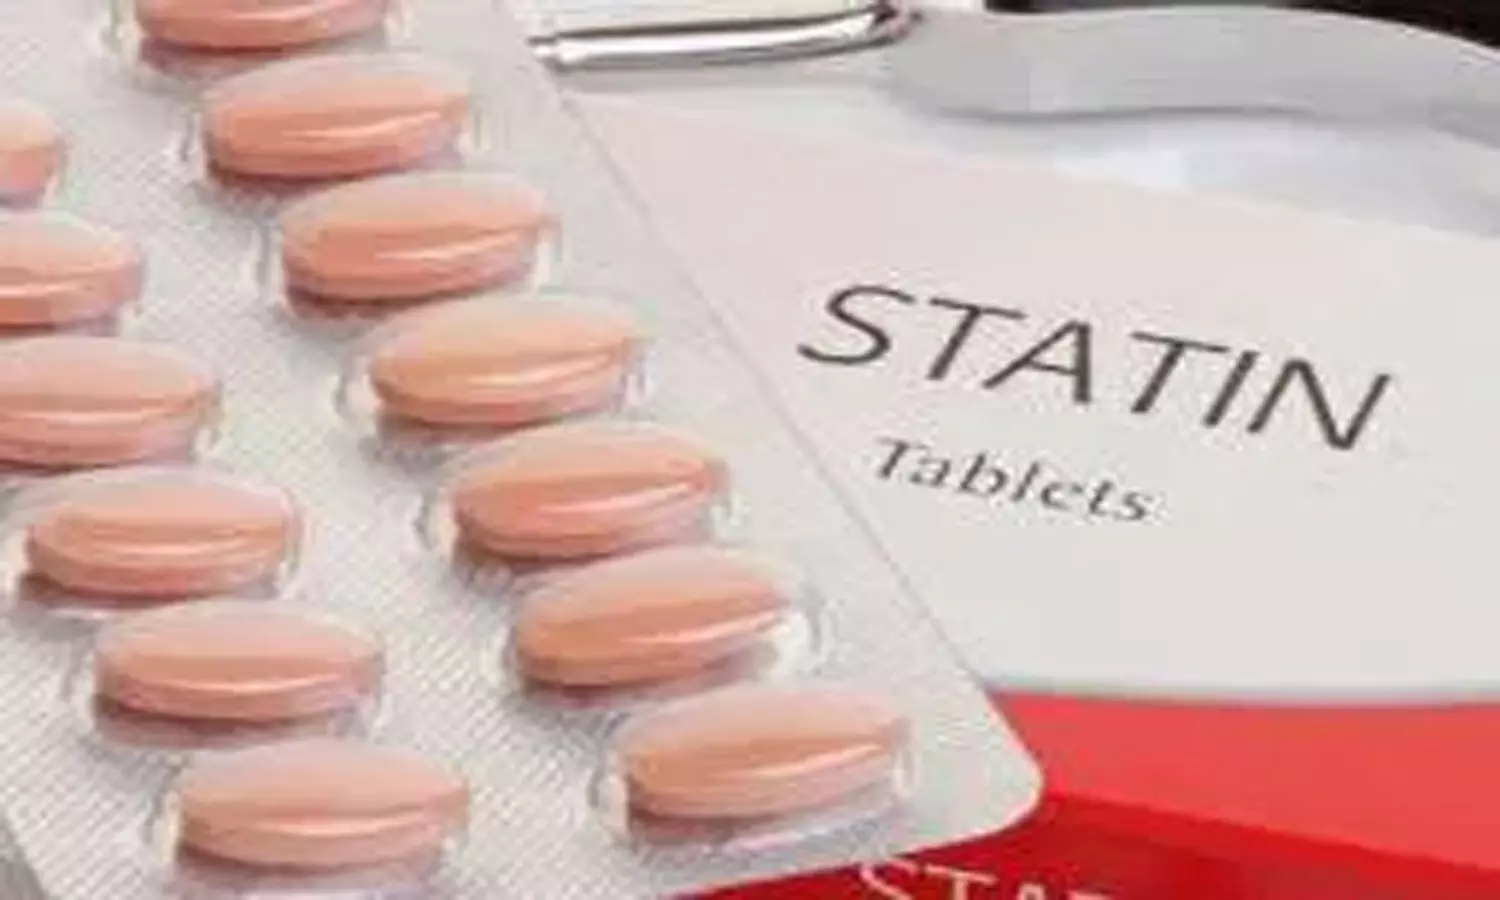 Statins may slow brain metastasis of breast cancer, finds study